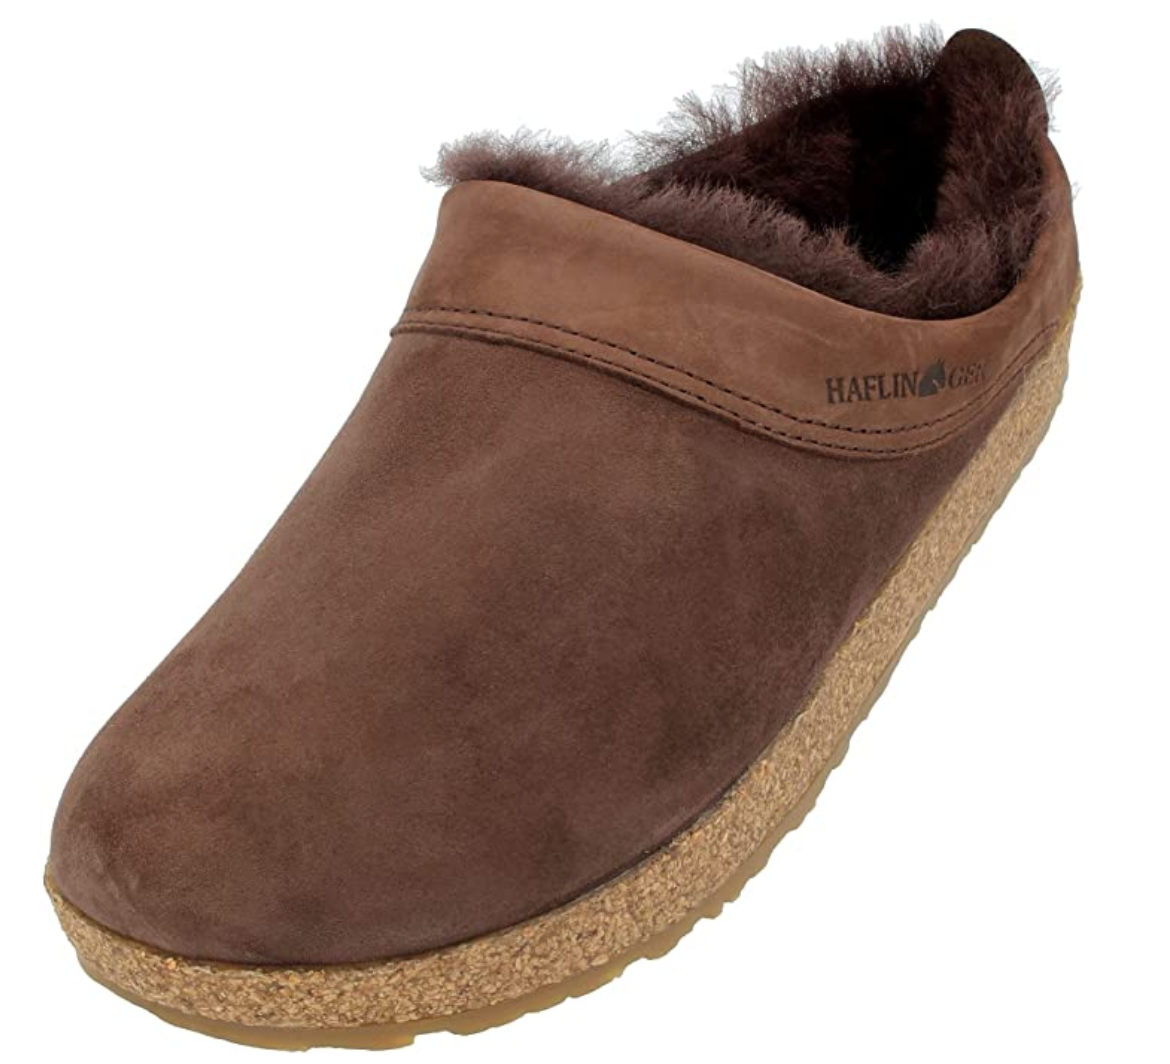 Haflinger Snowbird Shearling Slippers Clogs Mules Leather Cozy Lining New - Bartel-Shop